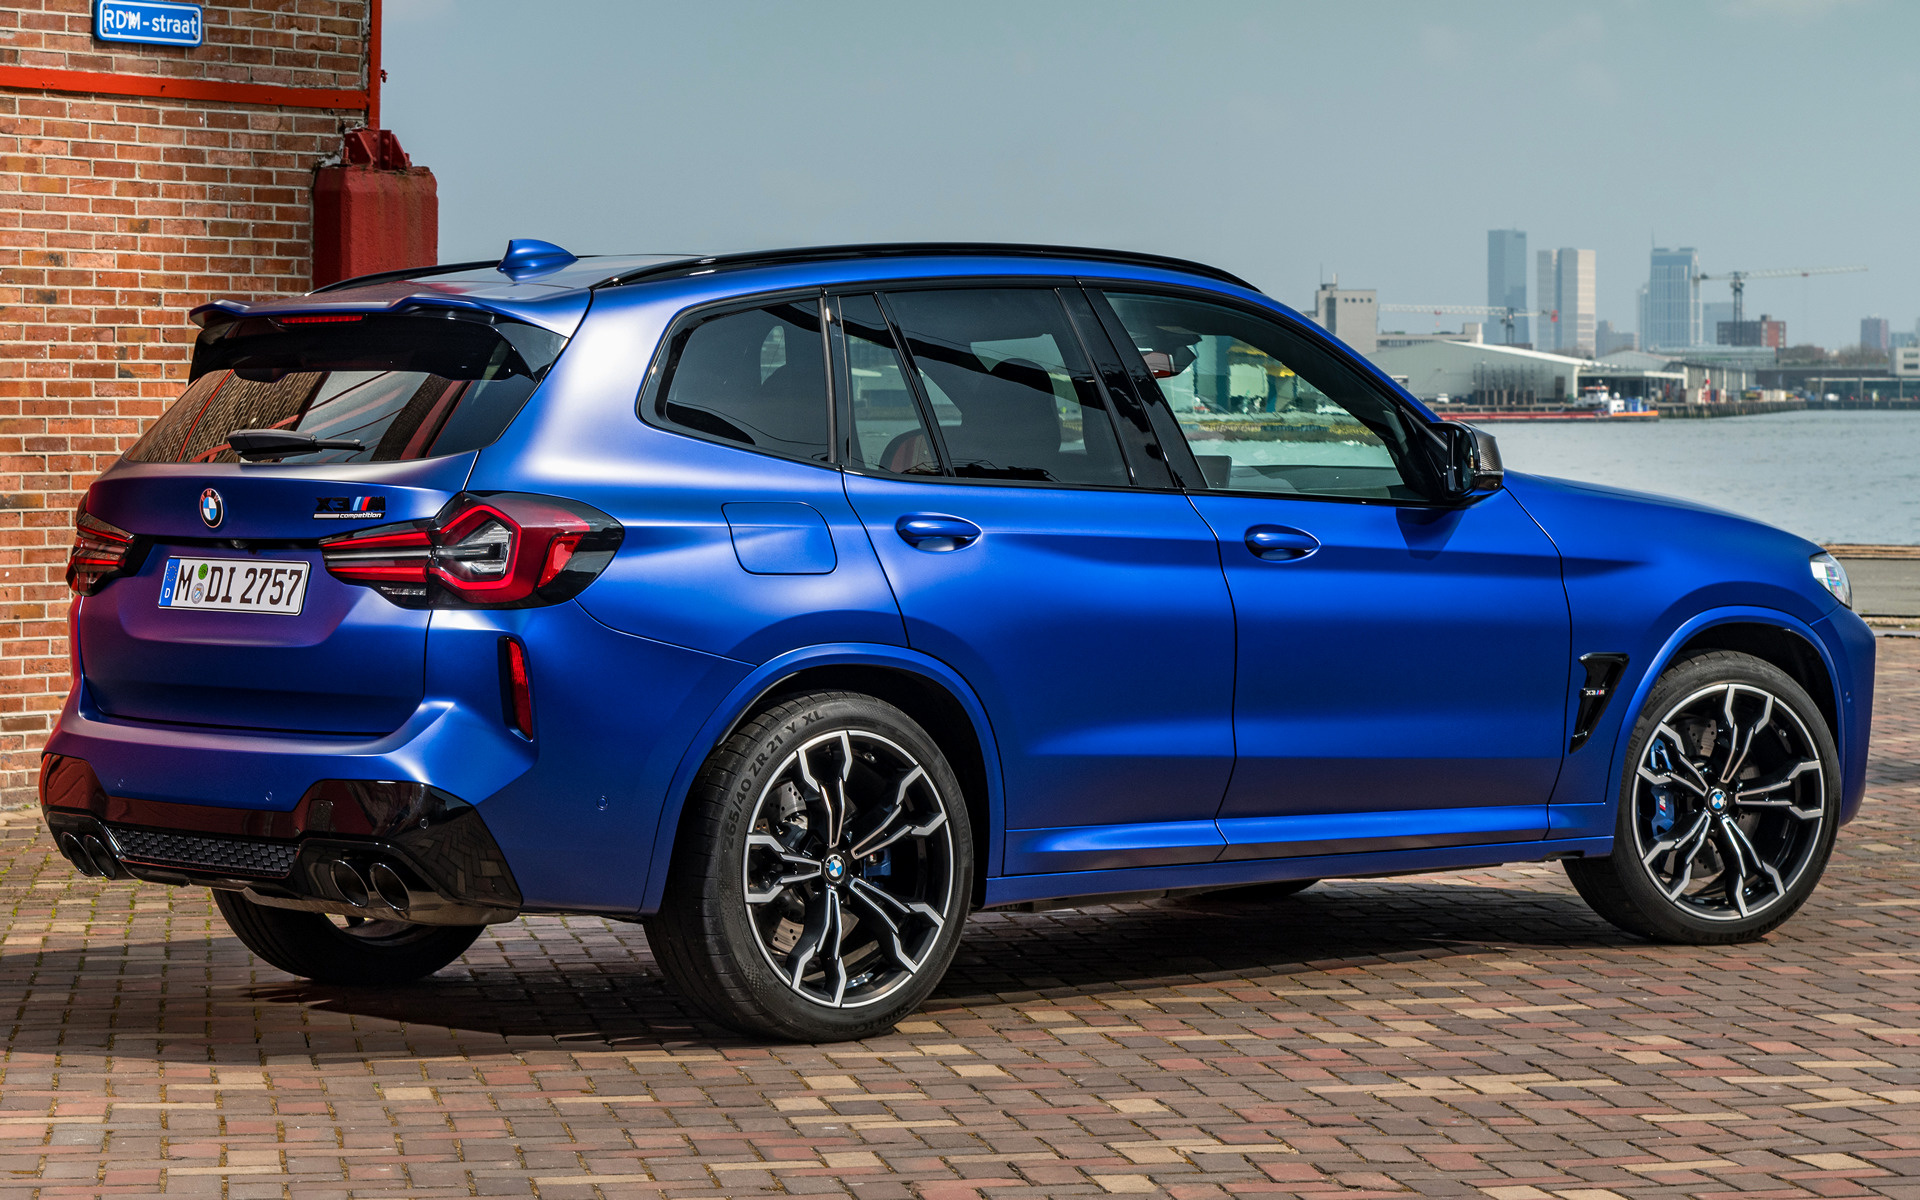 X3m competition. BMW x3m 2022. X3m Competition 2022. BMW x3 m Sport 2022. BMW x3 m Competition.